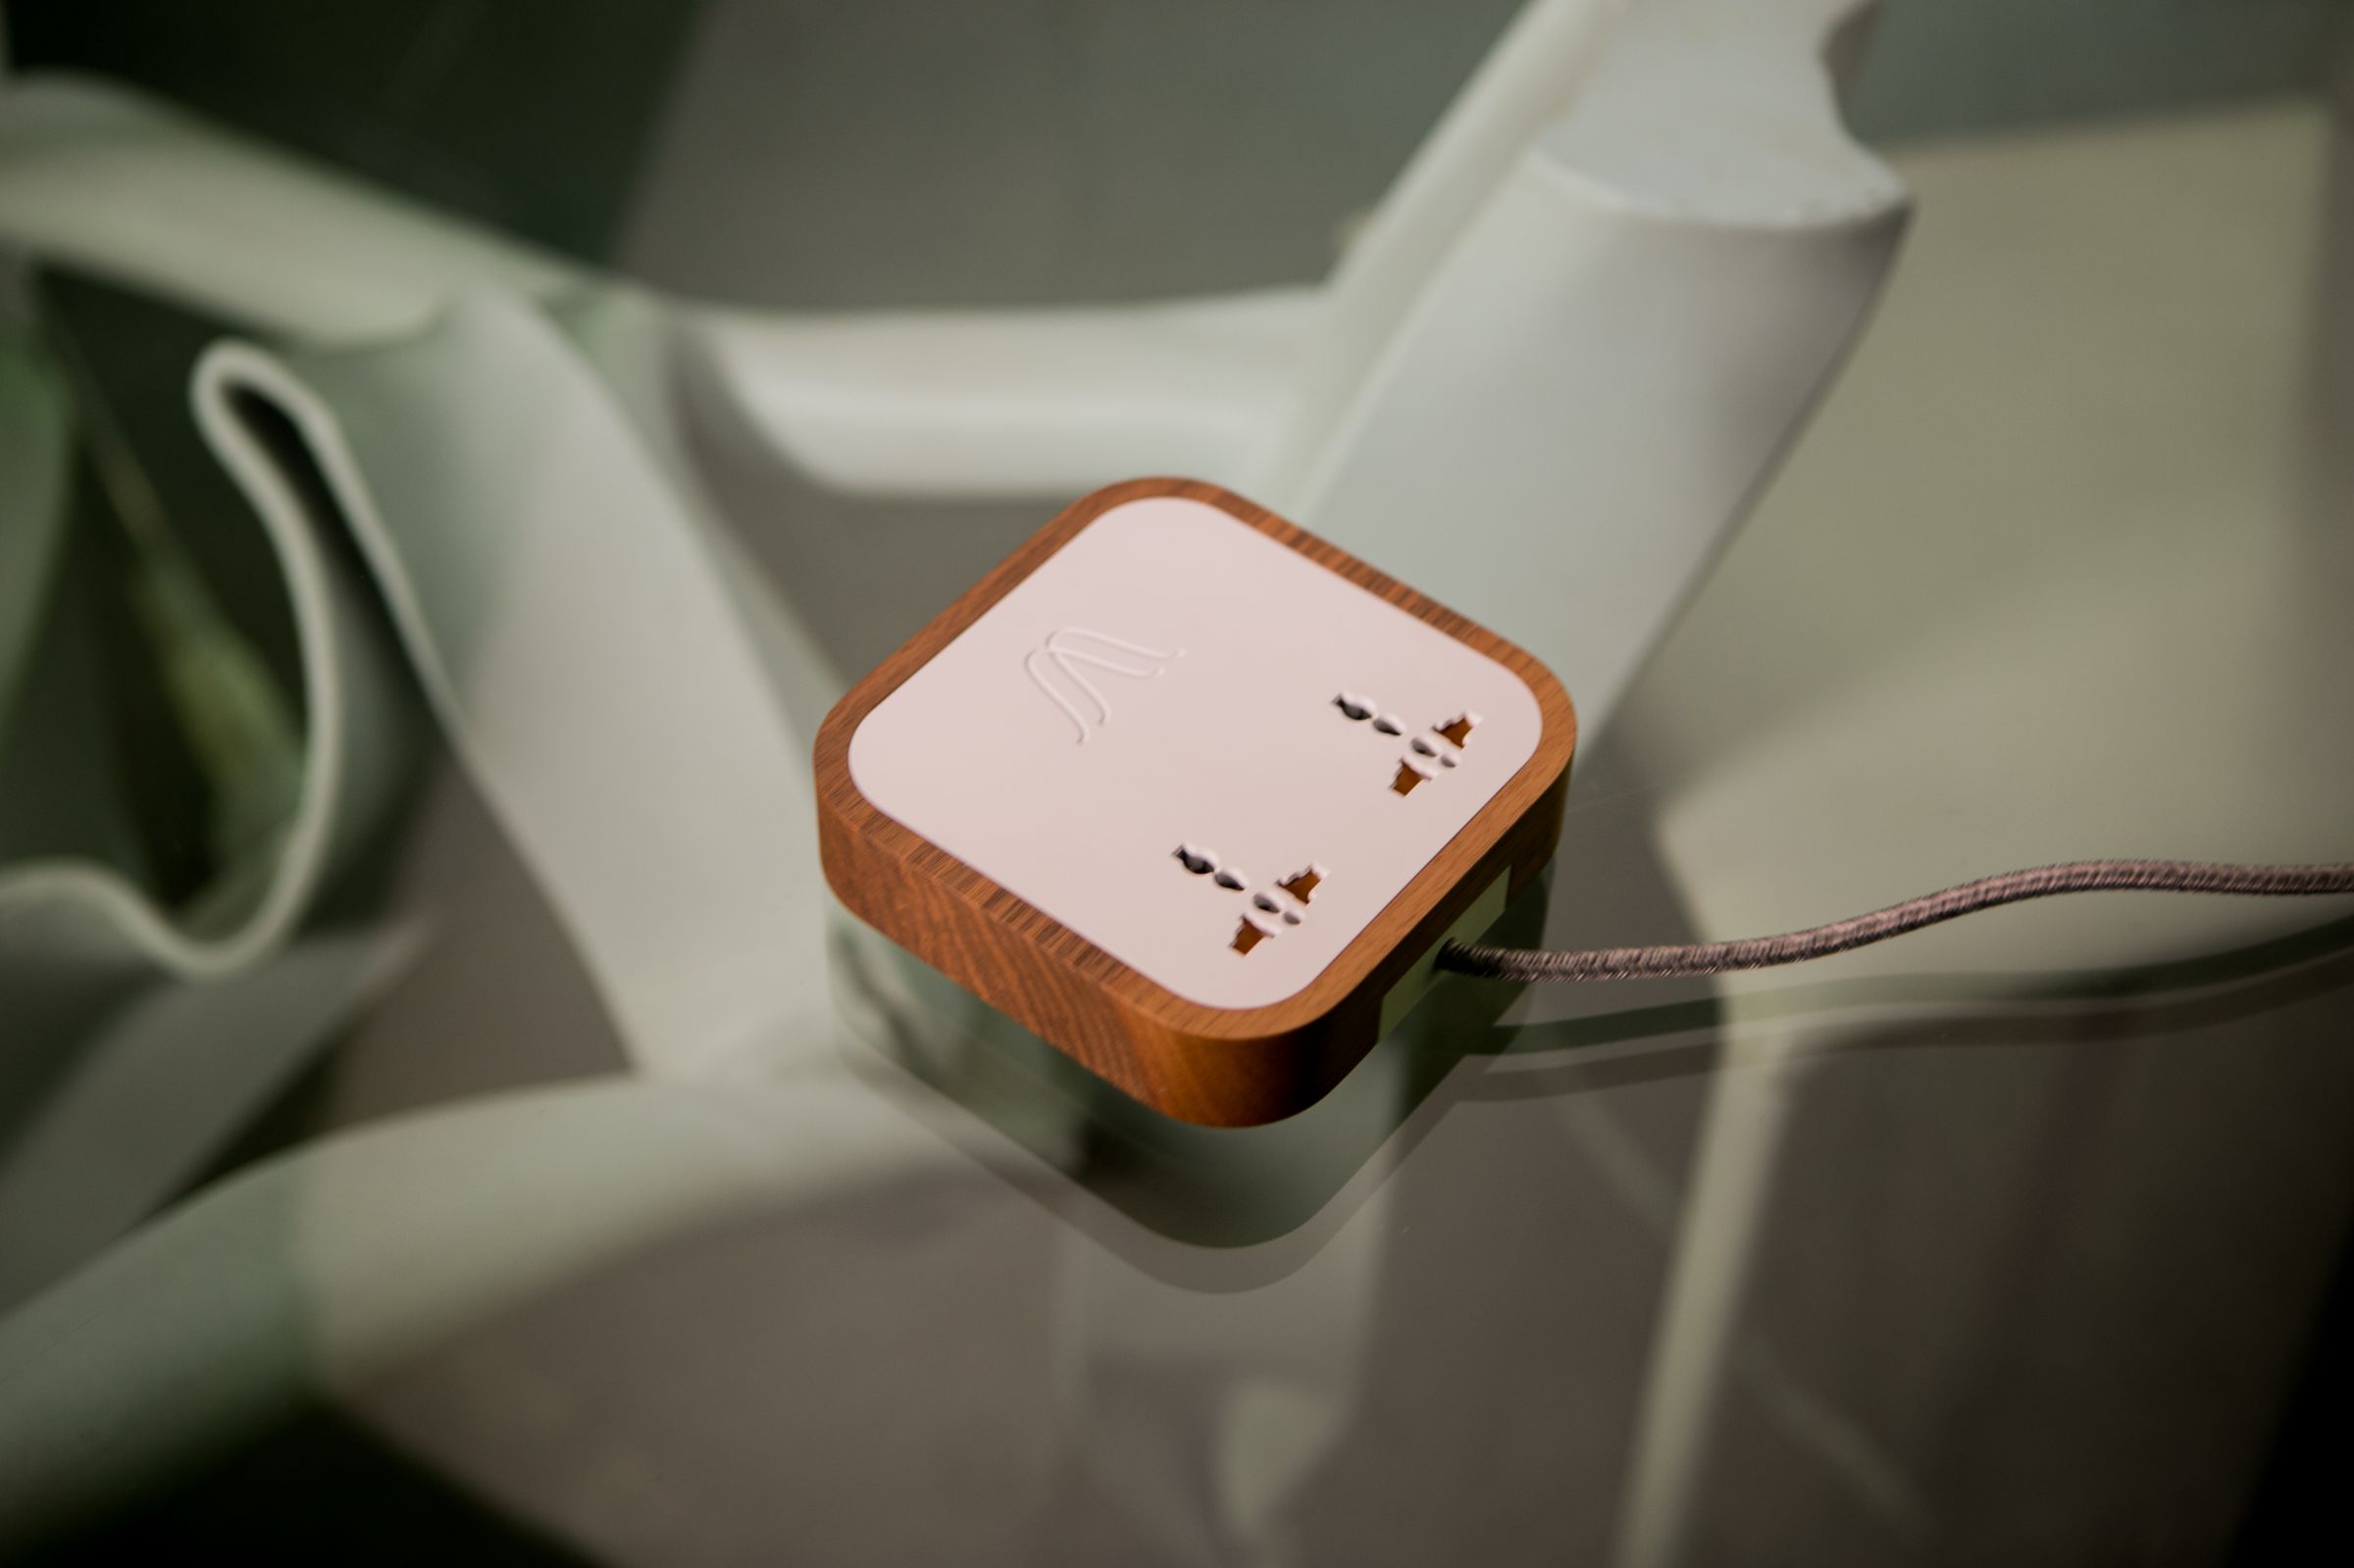 The Woodie Hub wants charging hubs to be pretty